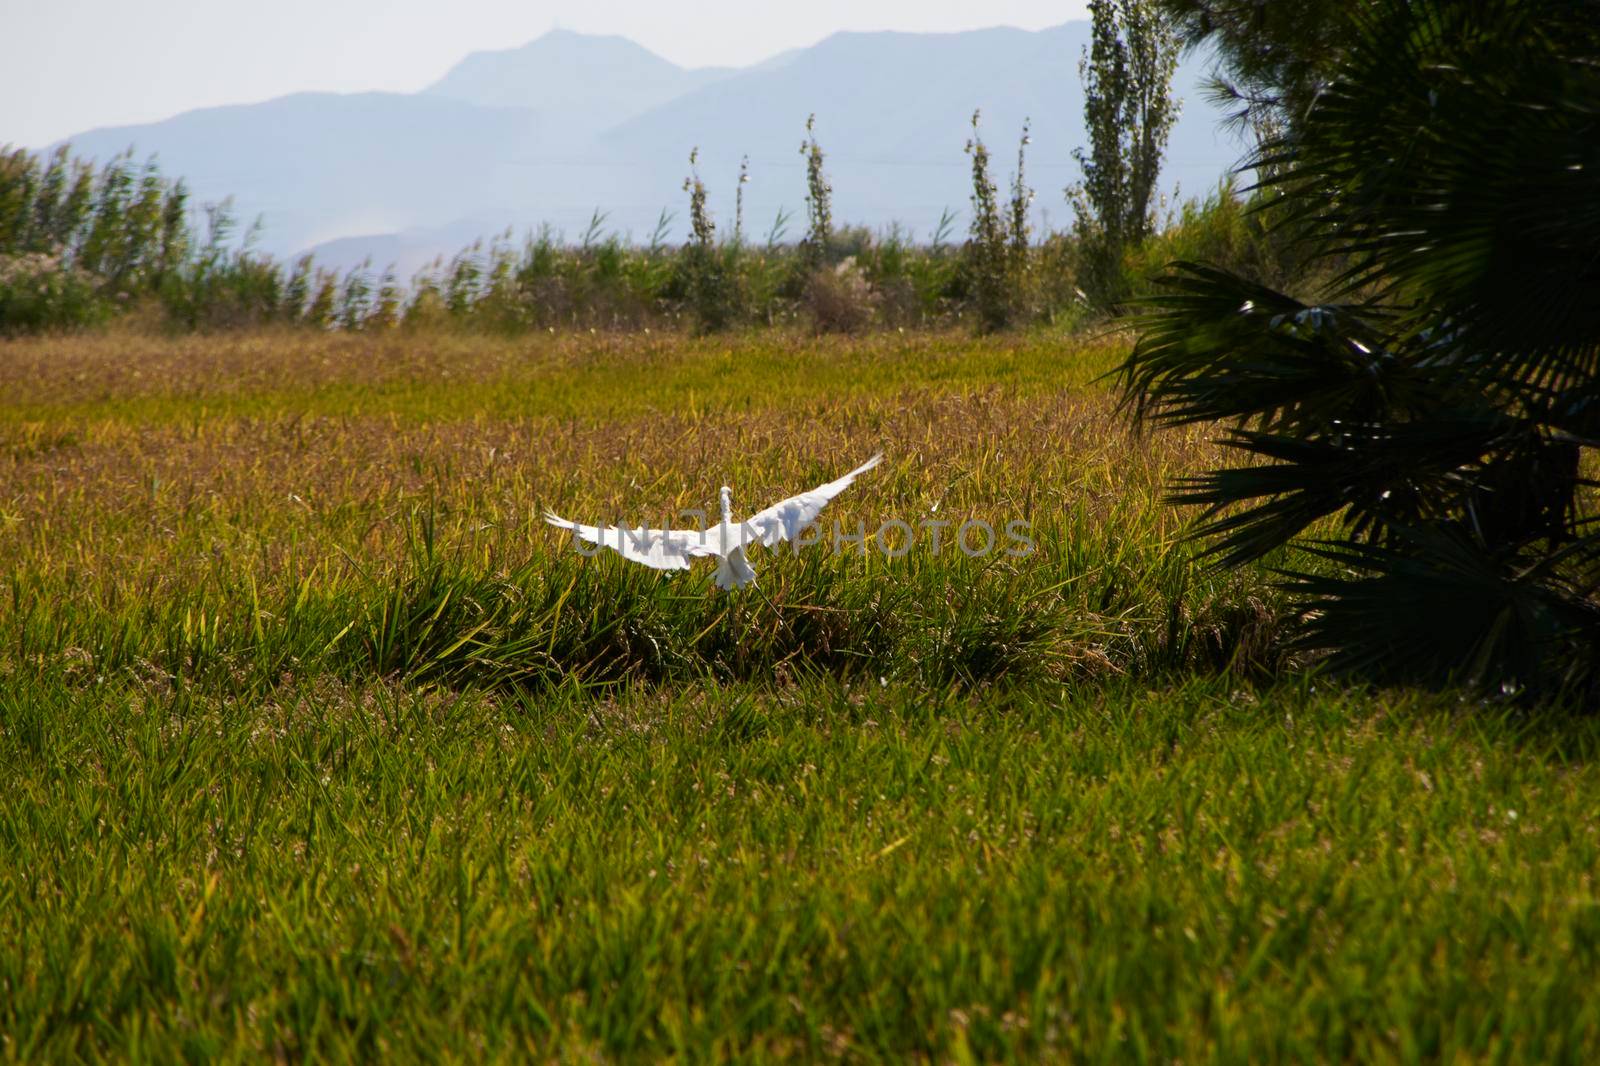 Heron starting to fly over rice fields by raul_ruiz